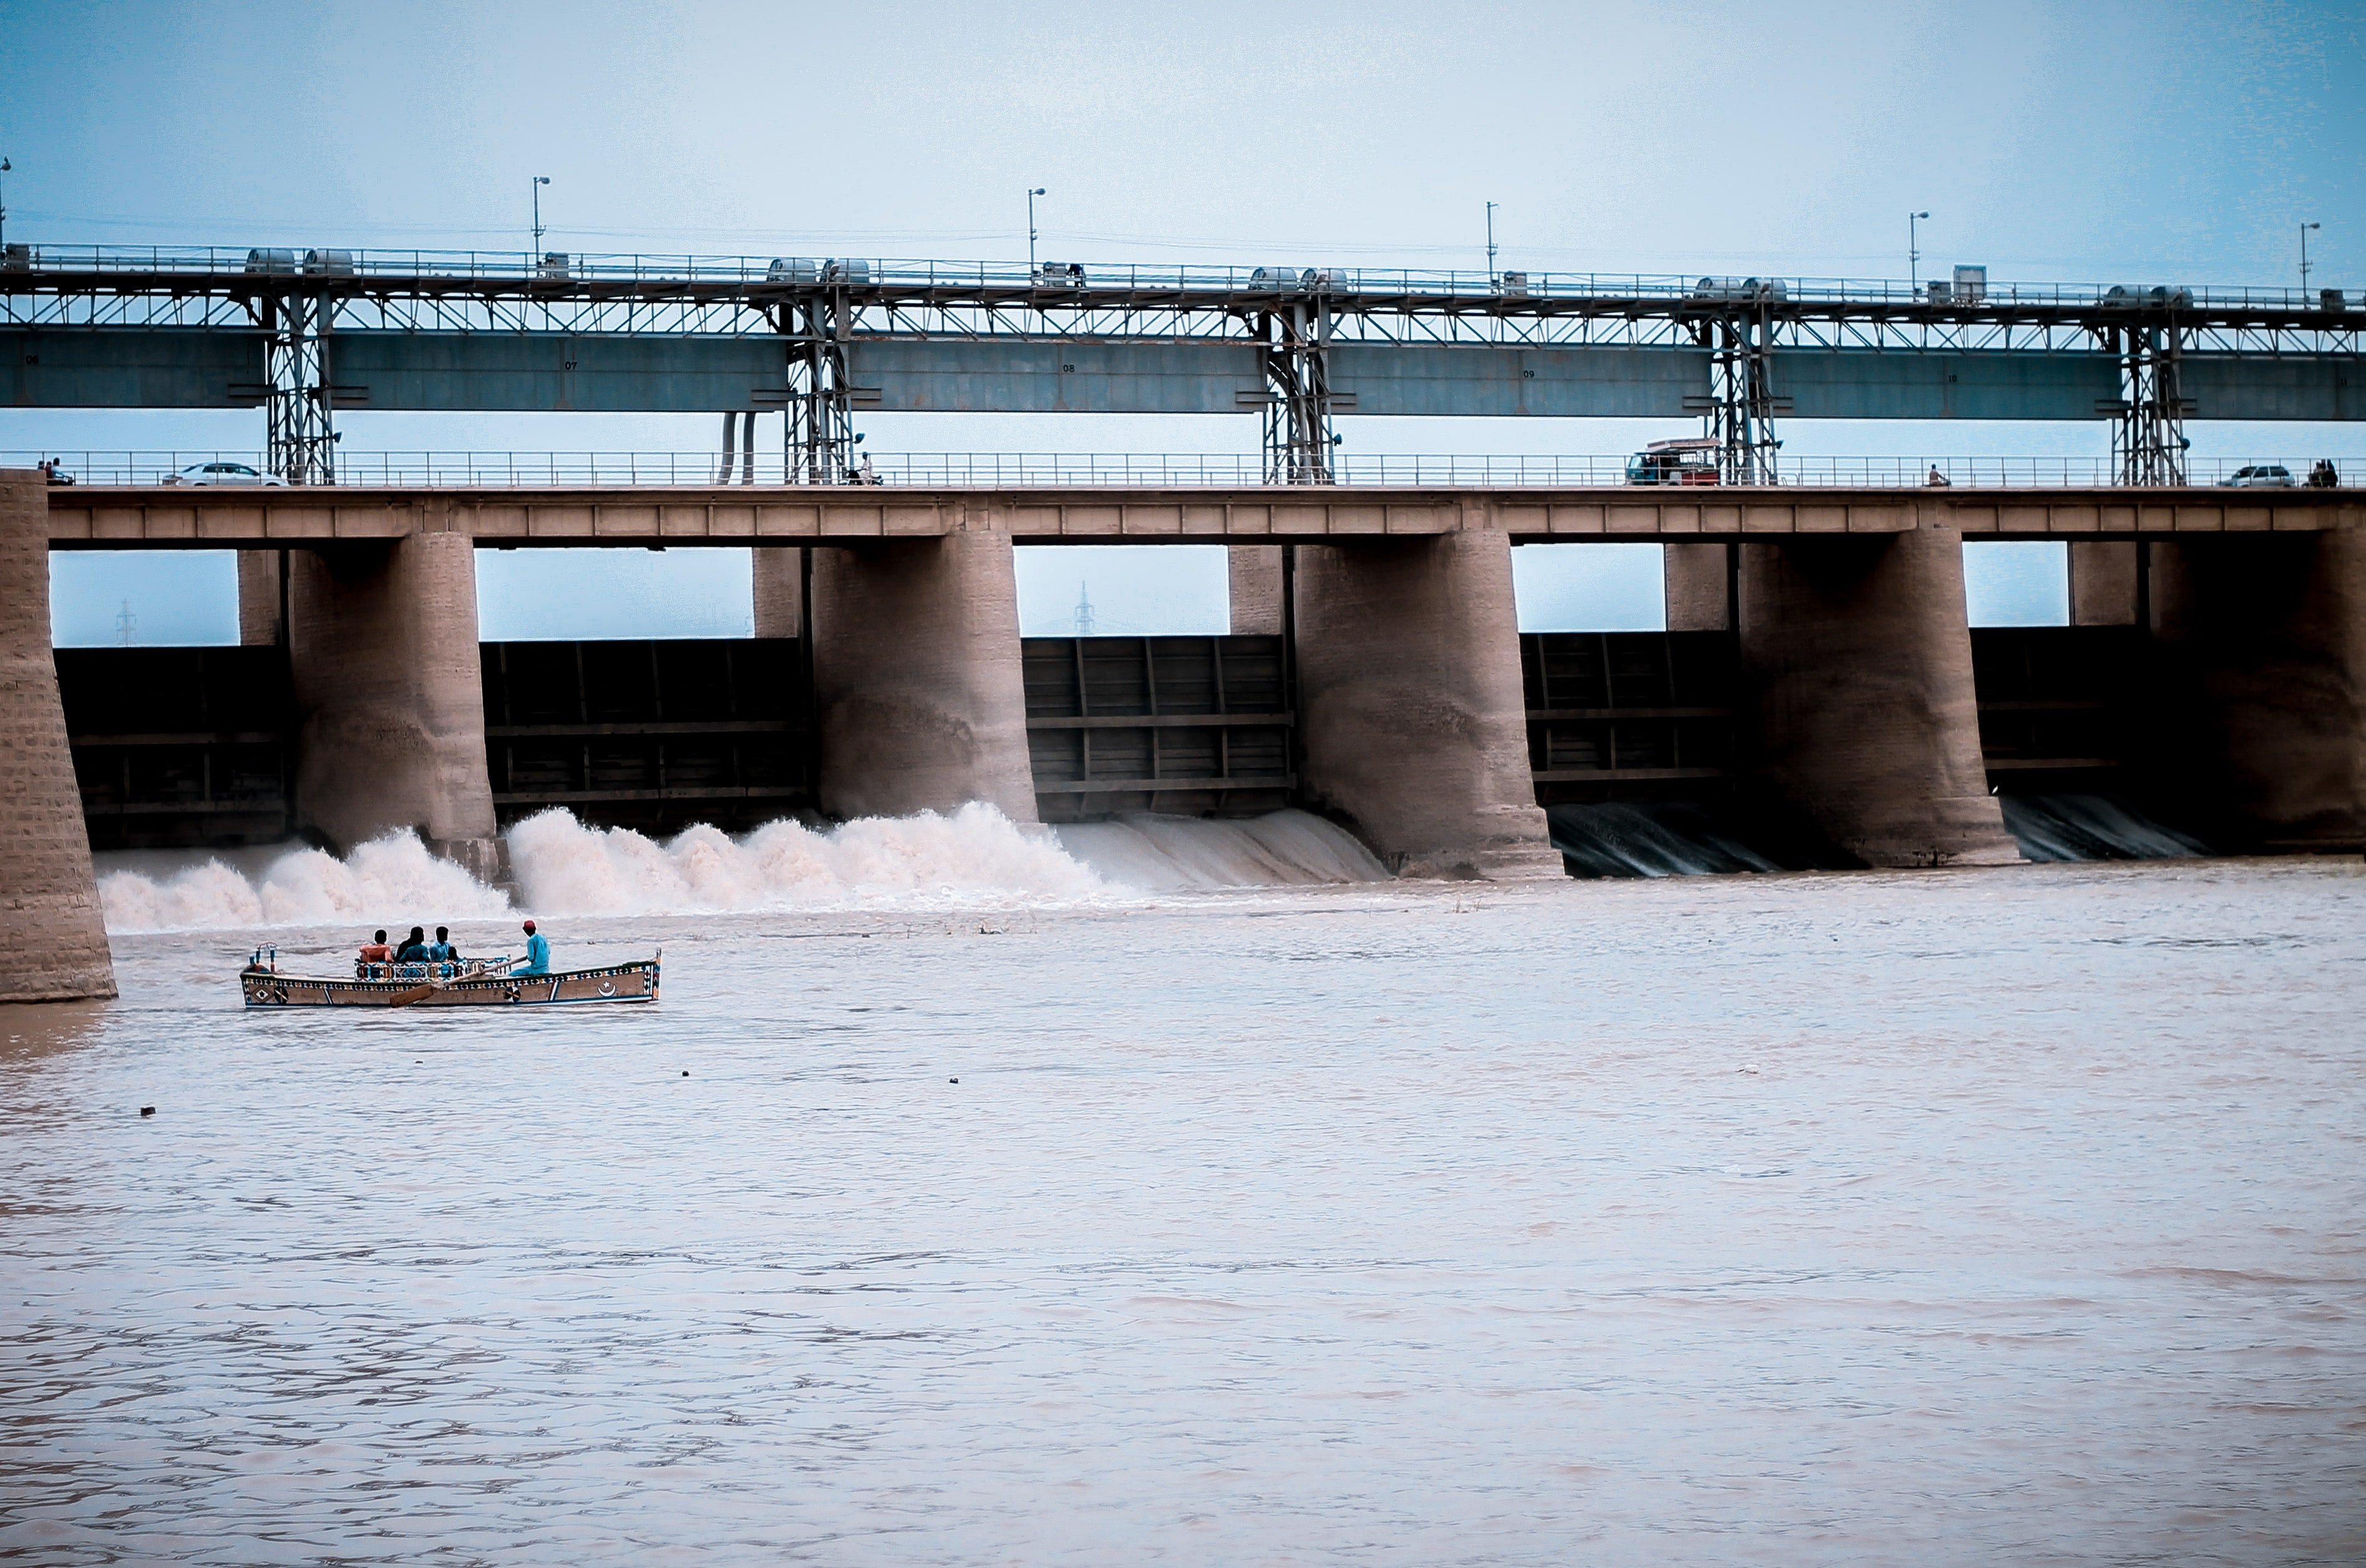 Pictured: A photo of people on a boat near a water dam | Source: Pexels 